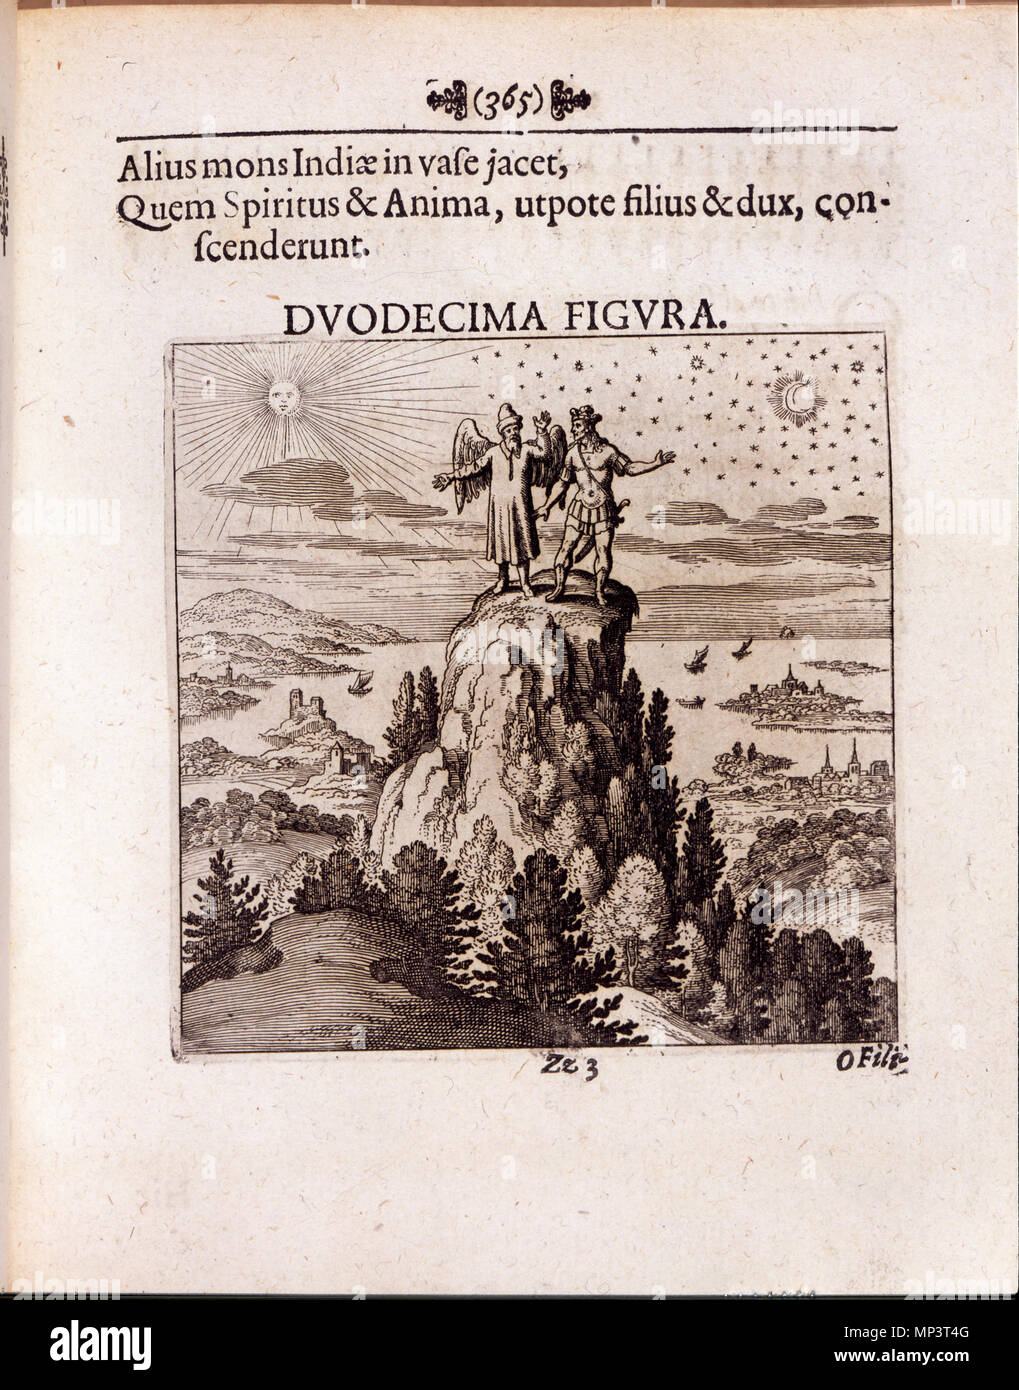 Duodecima Figura .  English: “Duodecima Figura” (Figure Twelve), engraved by Matthaeus Merian (1593–1650). Figure 12 from Lambsprinck's De Lapide Philosophico [On the Philosophers' Stone] as published in the Musaeum hermeticum, reformatum et amplificatum. Francofurti : Apud Hermannum à Sande, 1678. In Latin. Two male figures are standing on top of a tree-covered mountain. The being on the left has wings and a hat. The person on the right bears a sword. To their left is the sun, to the right is the moon. Below are lakes, sailing ships, and towns. The top of the page reads 'Alius mons Indiae in  Stock Photo